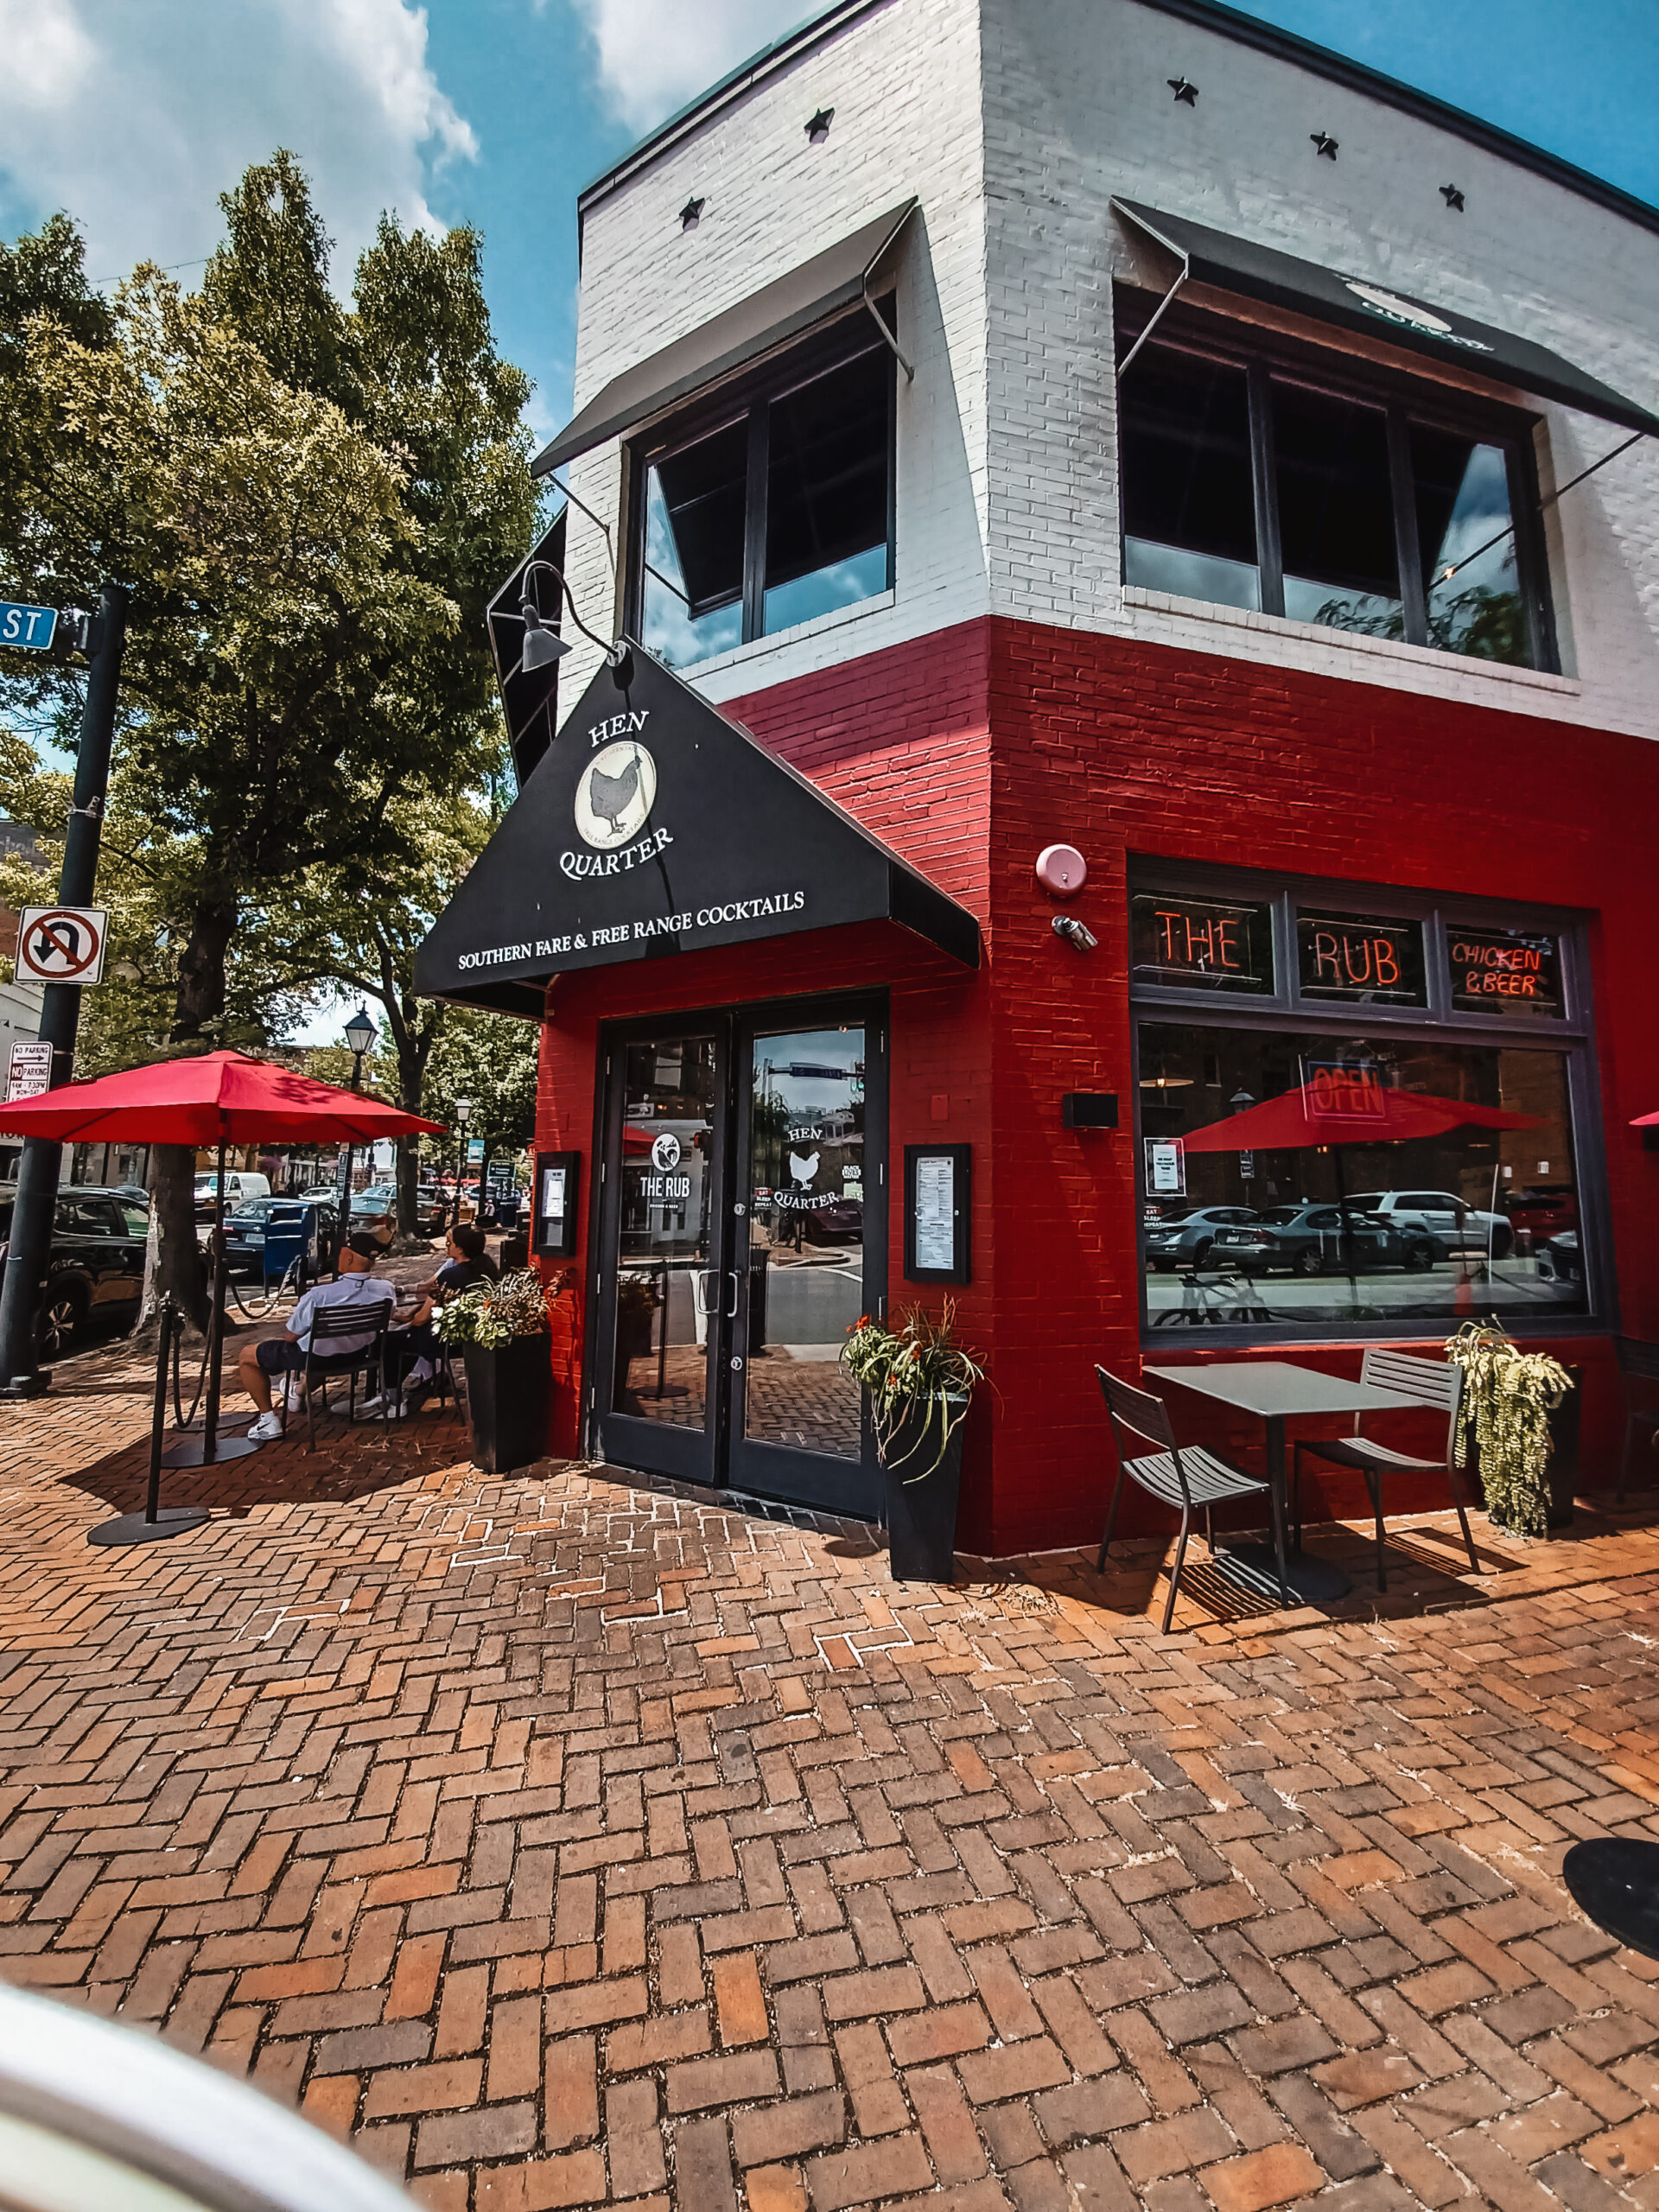 Photo of Hen Quarter restaurant in Alexandria Virginia. The building is red and white and black.